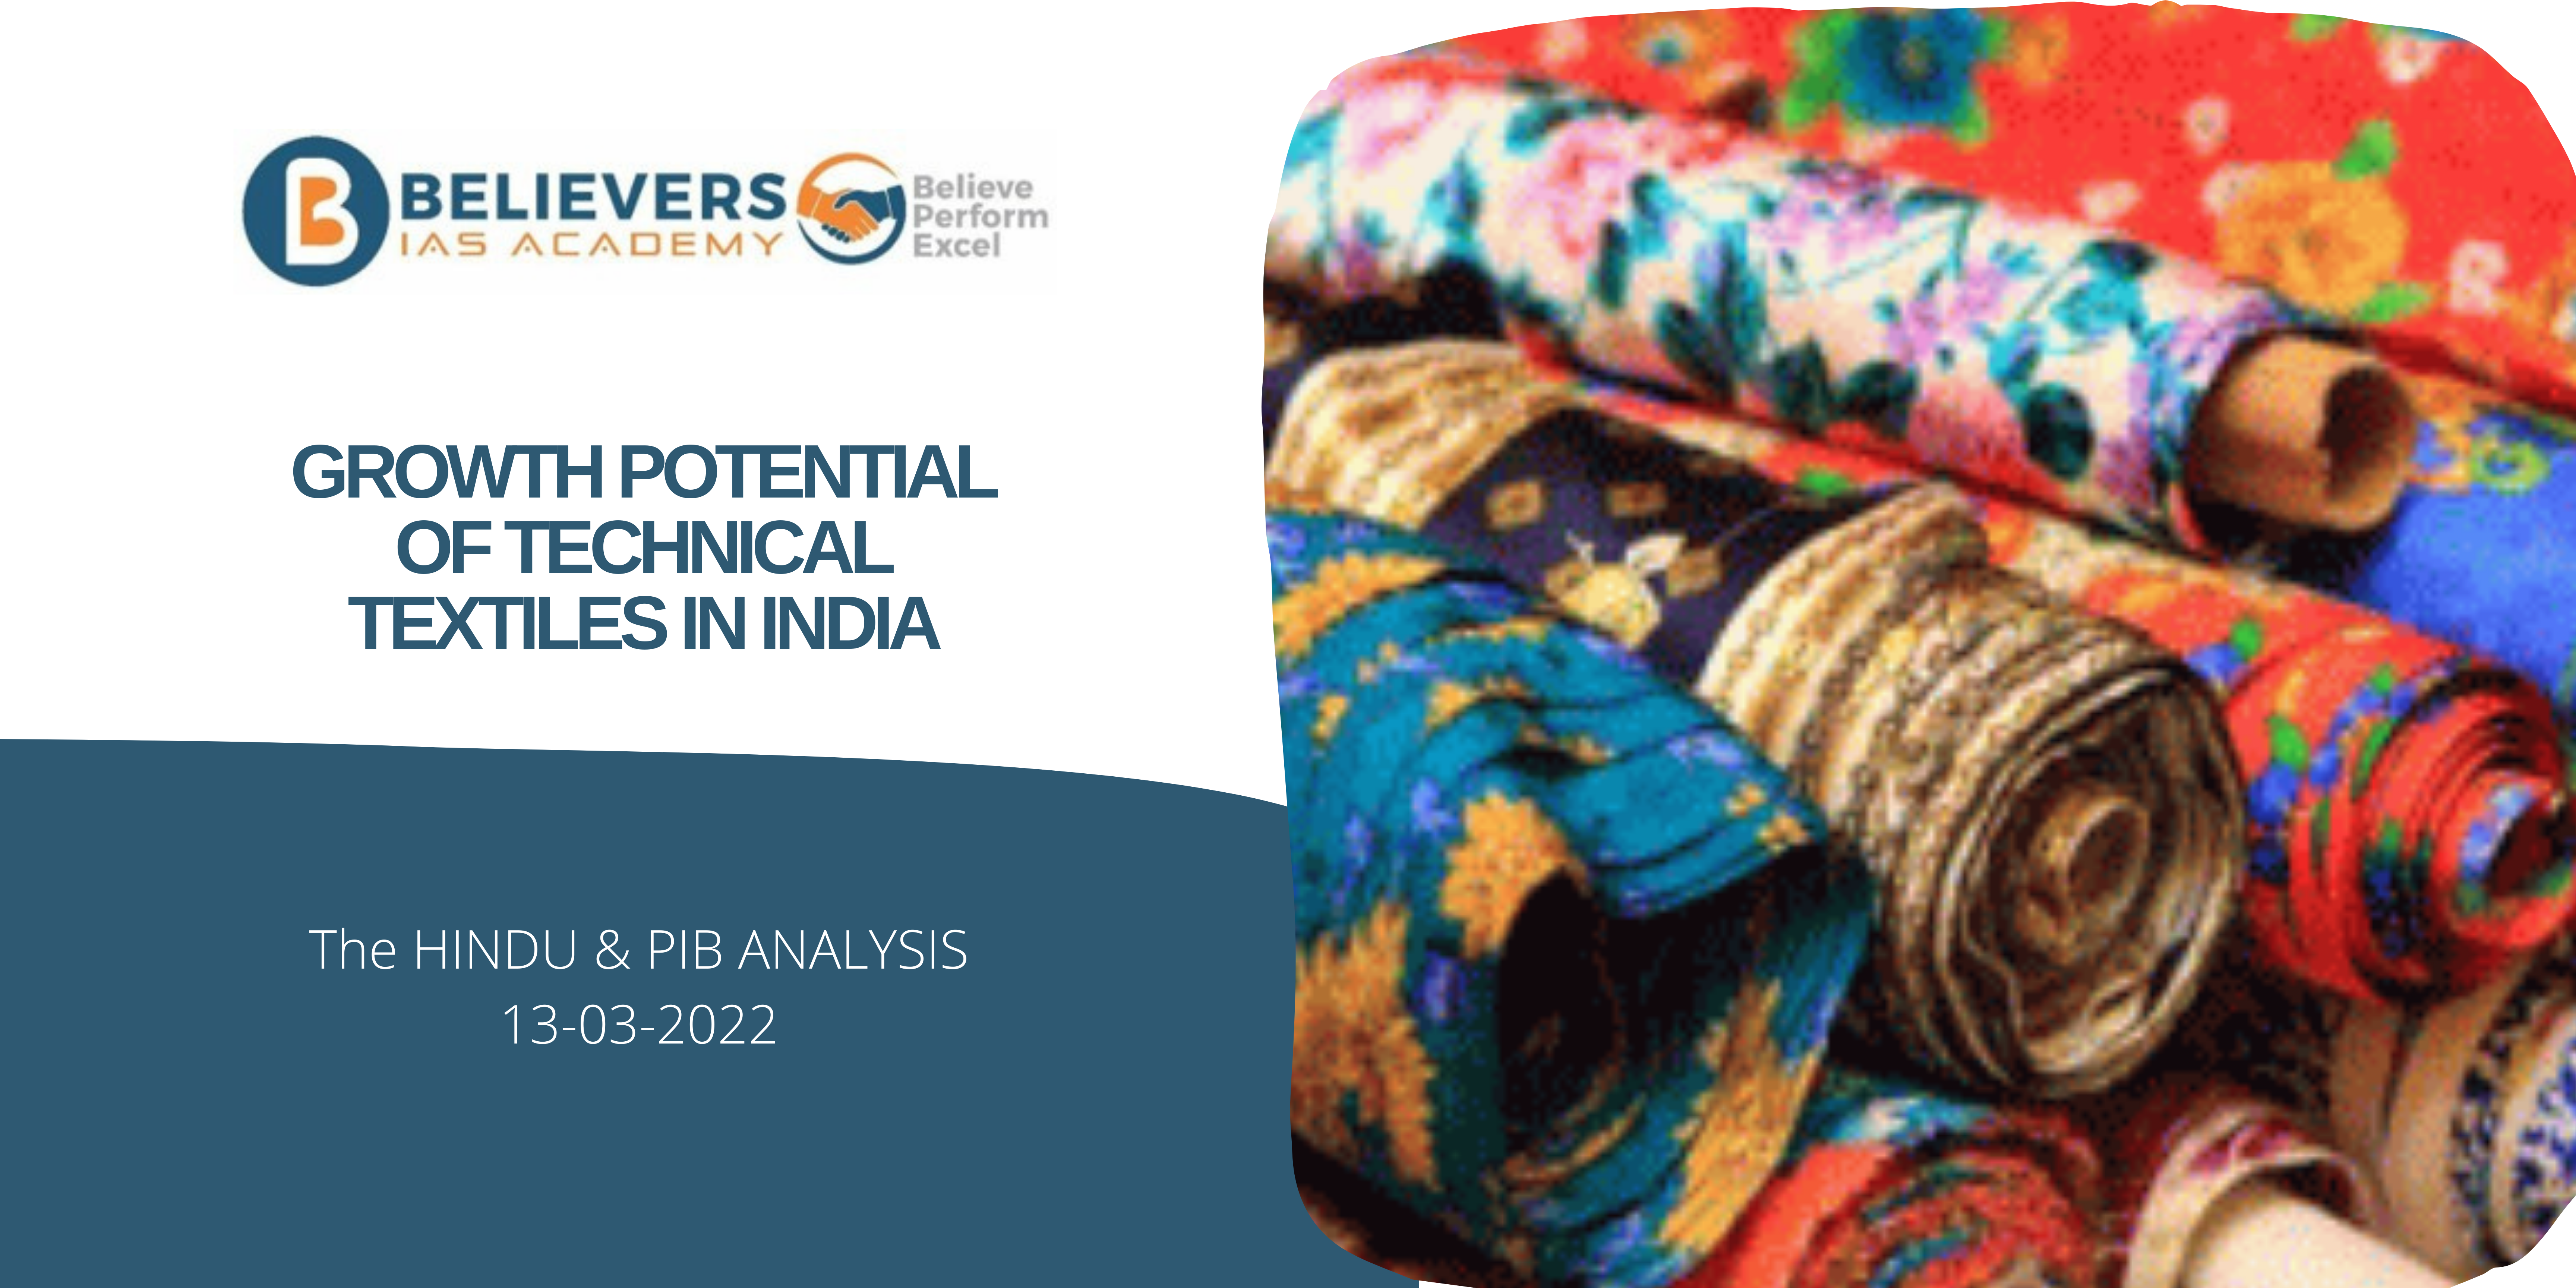 UPSC Current affairs - Growth Potential of Technical Textiles in India